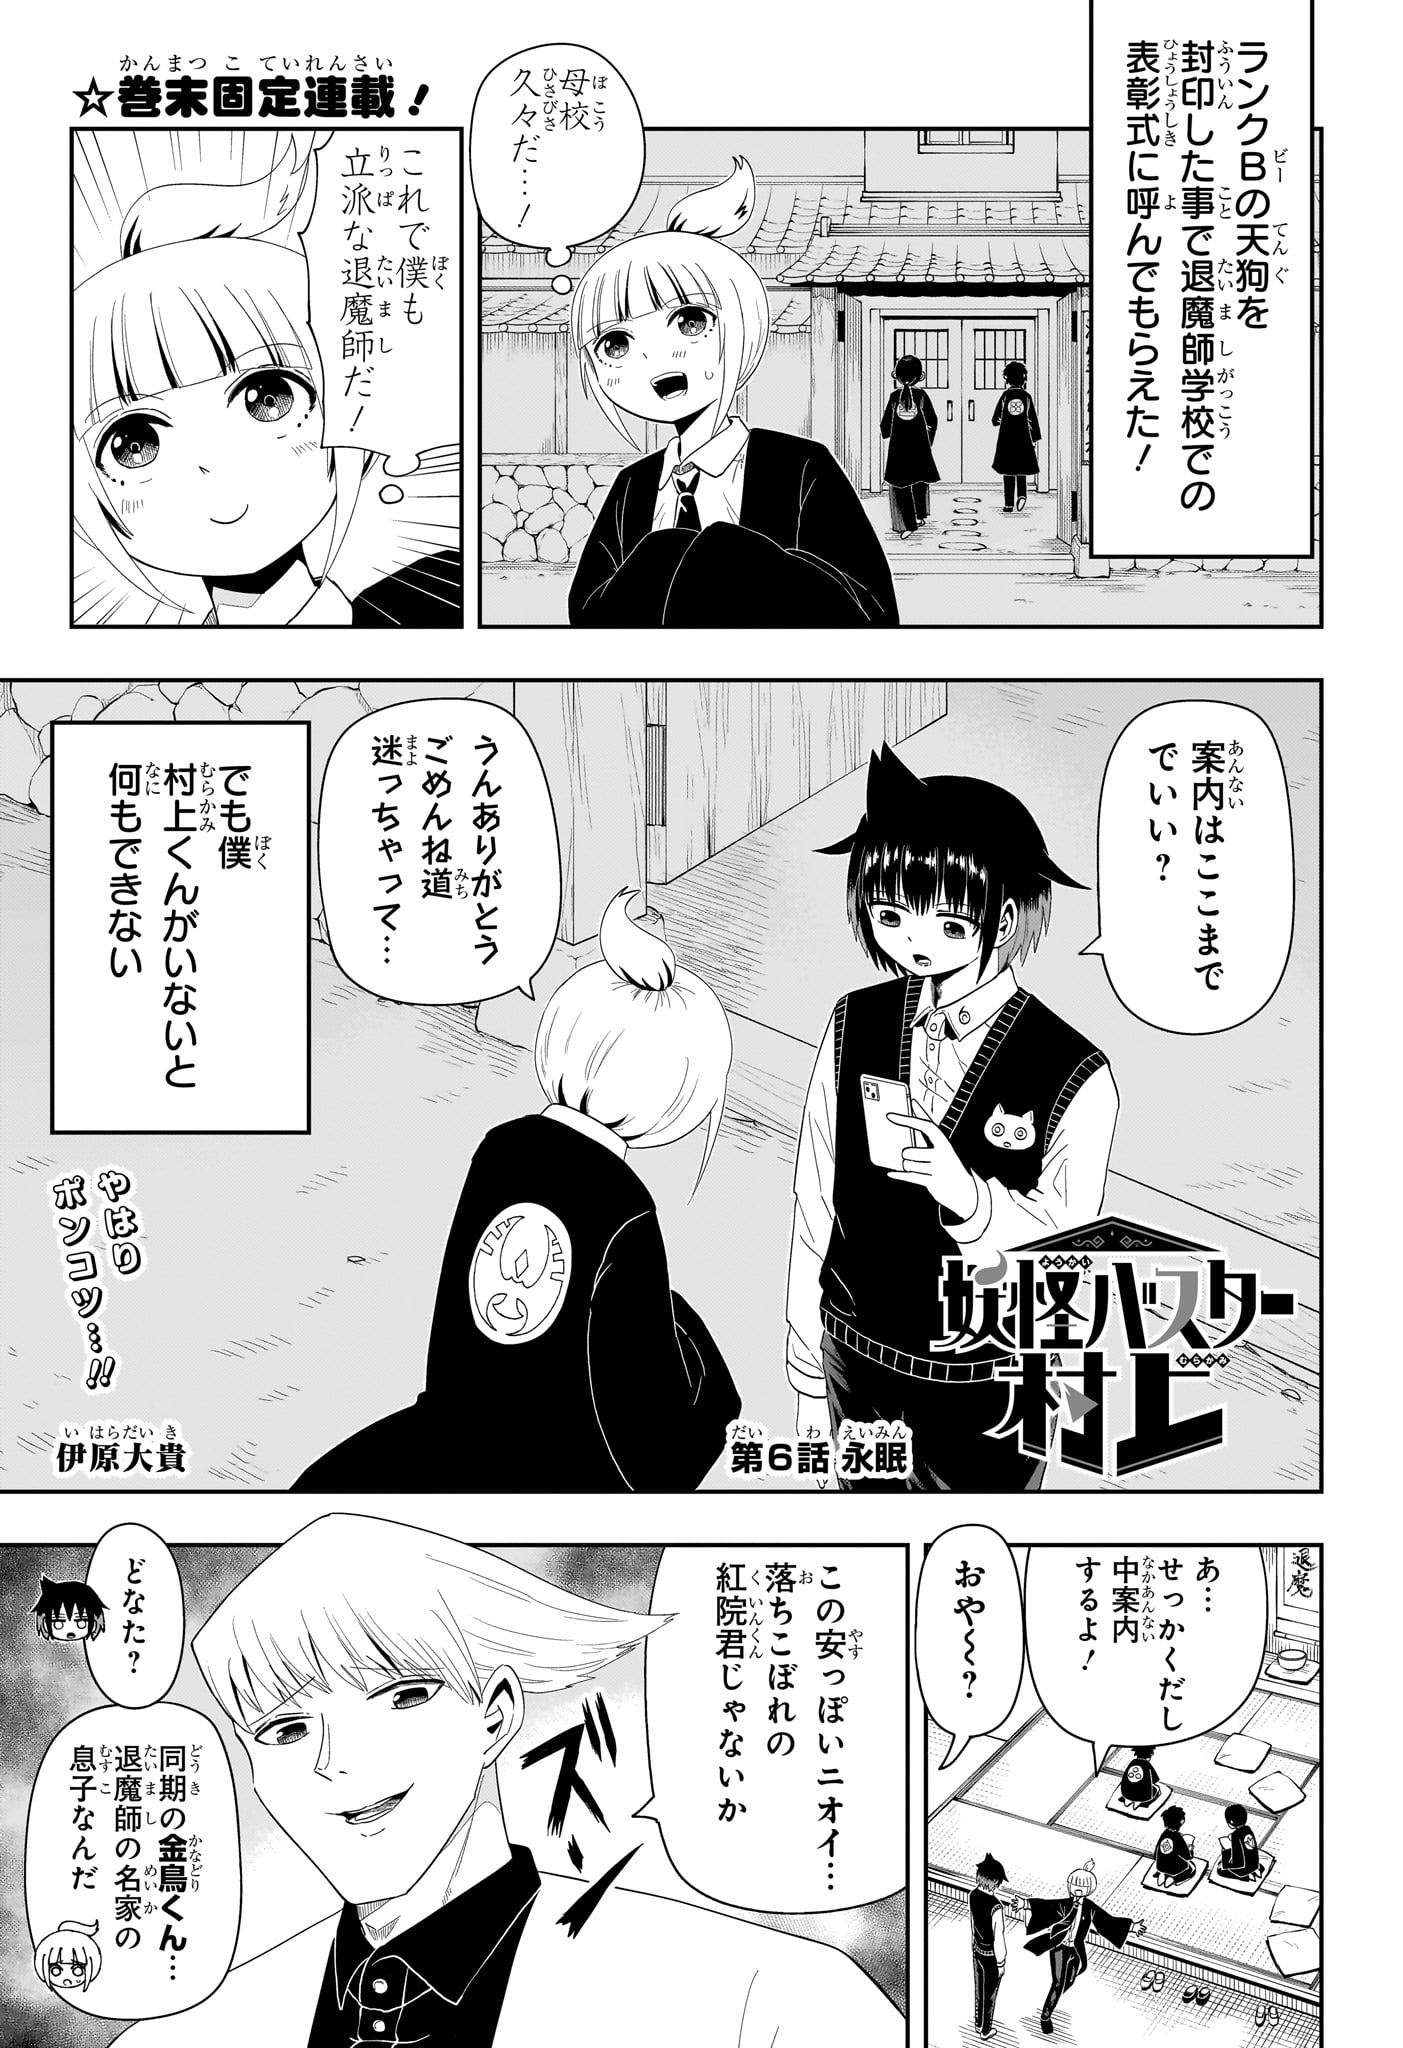 Youkai Buster Murakami - Chapter 6 - Page 1